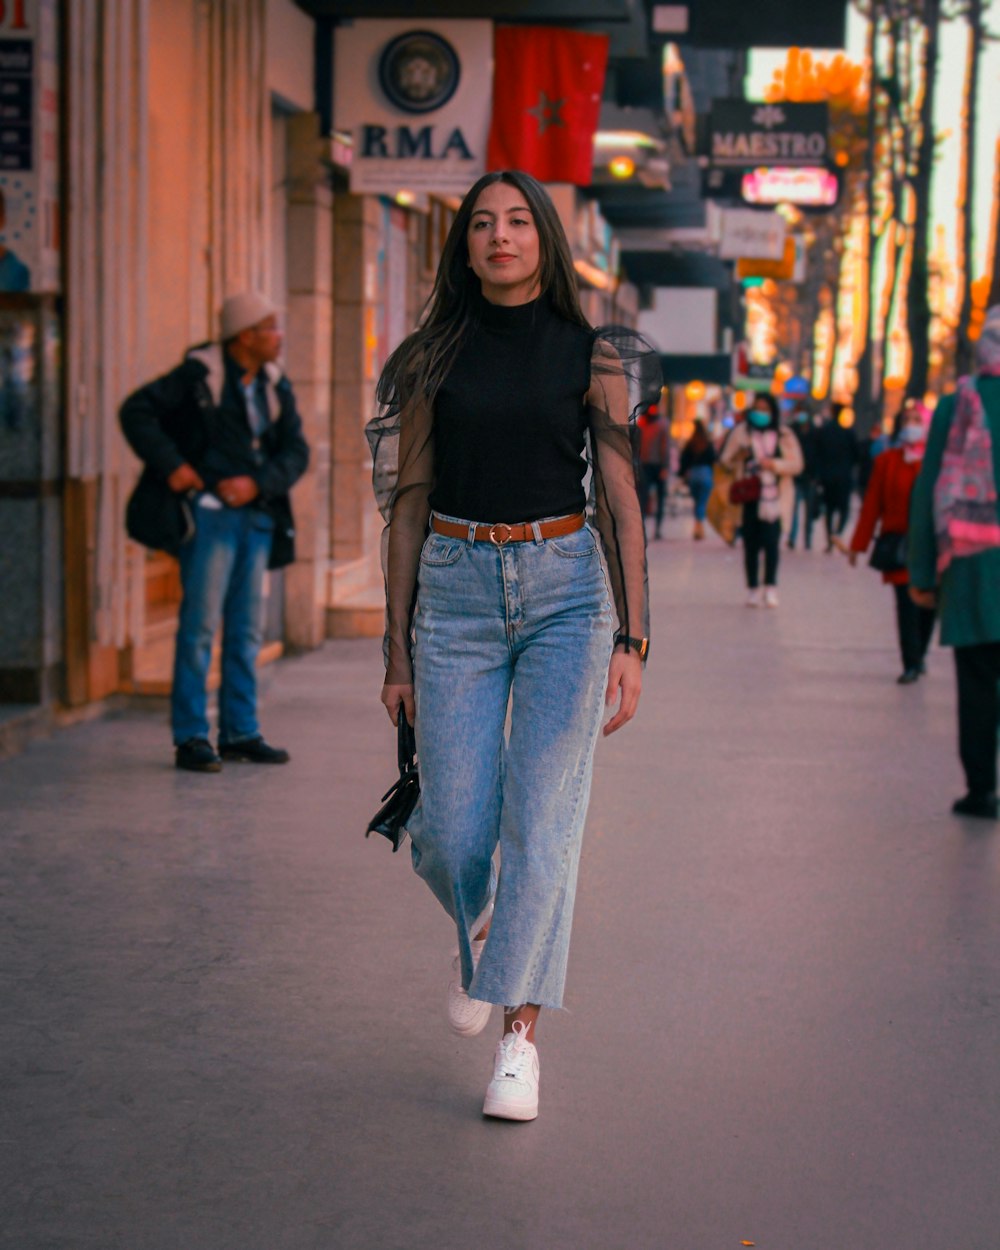 Woman in black shirt and blue denim jeans standing on street during daytime  photo – Free Maroc Image on Unsplash